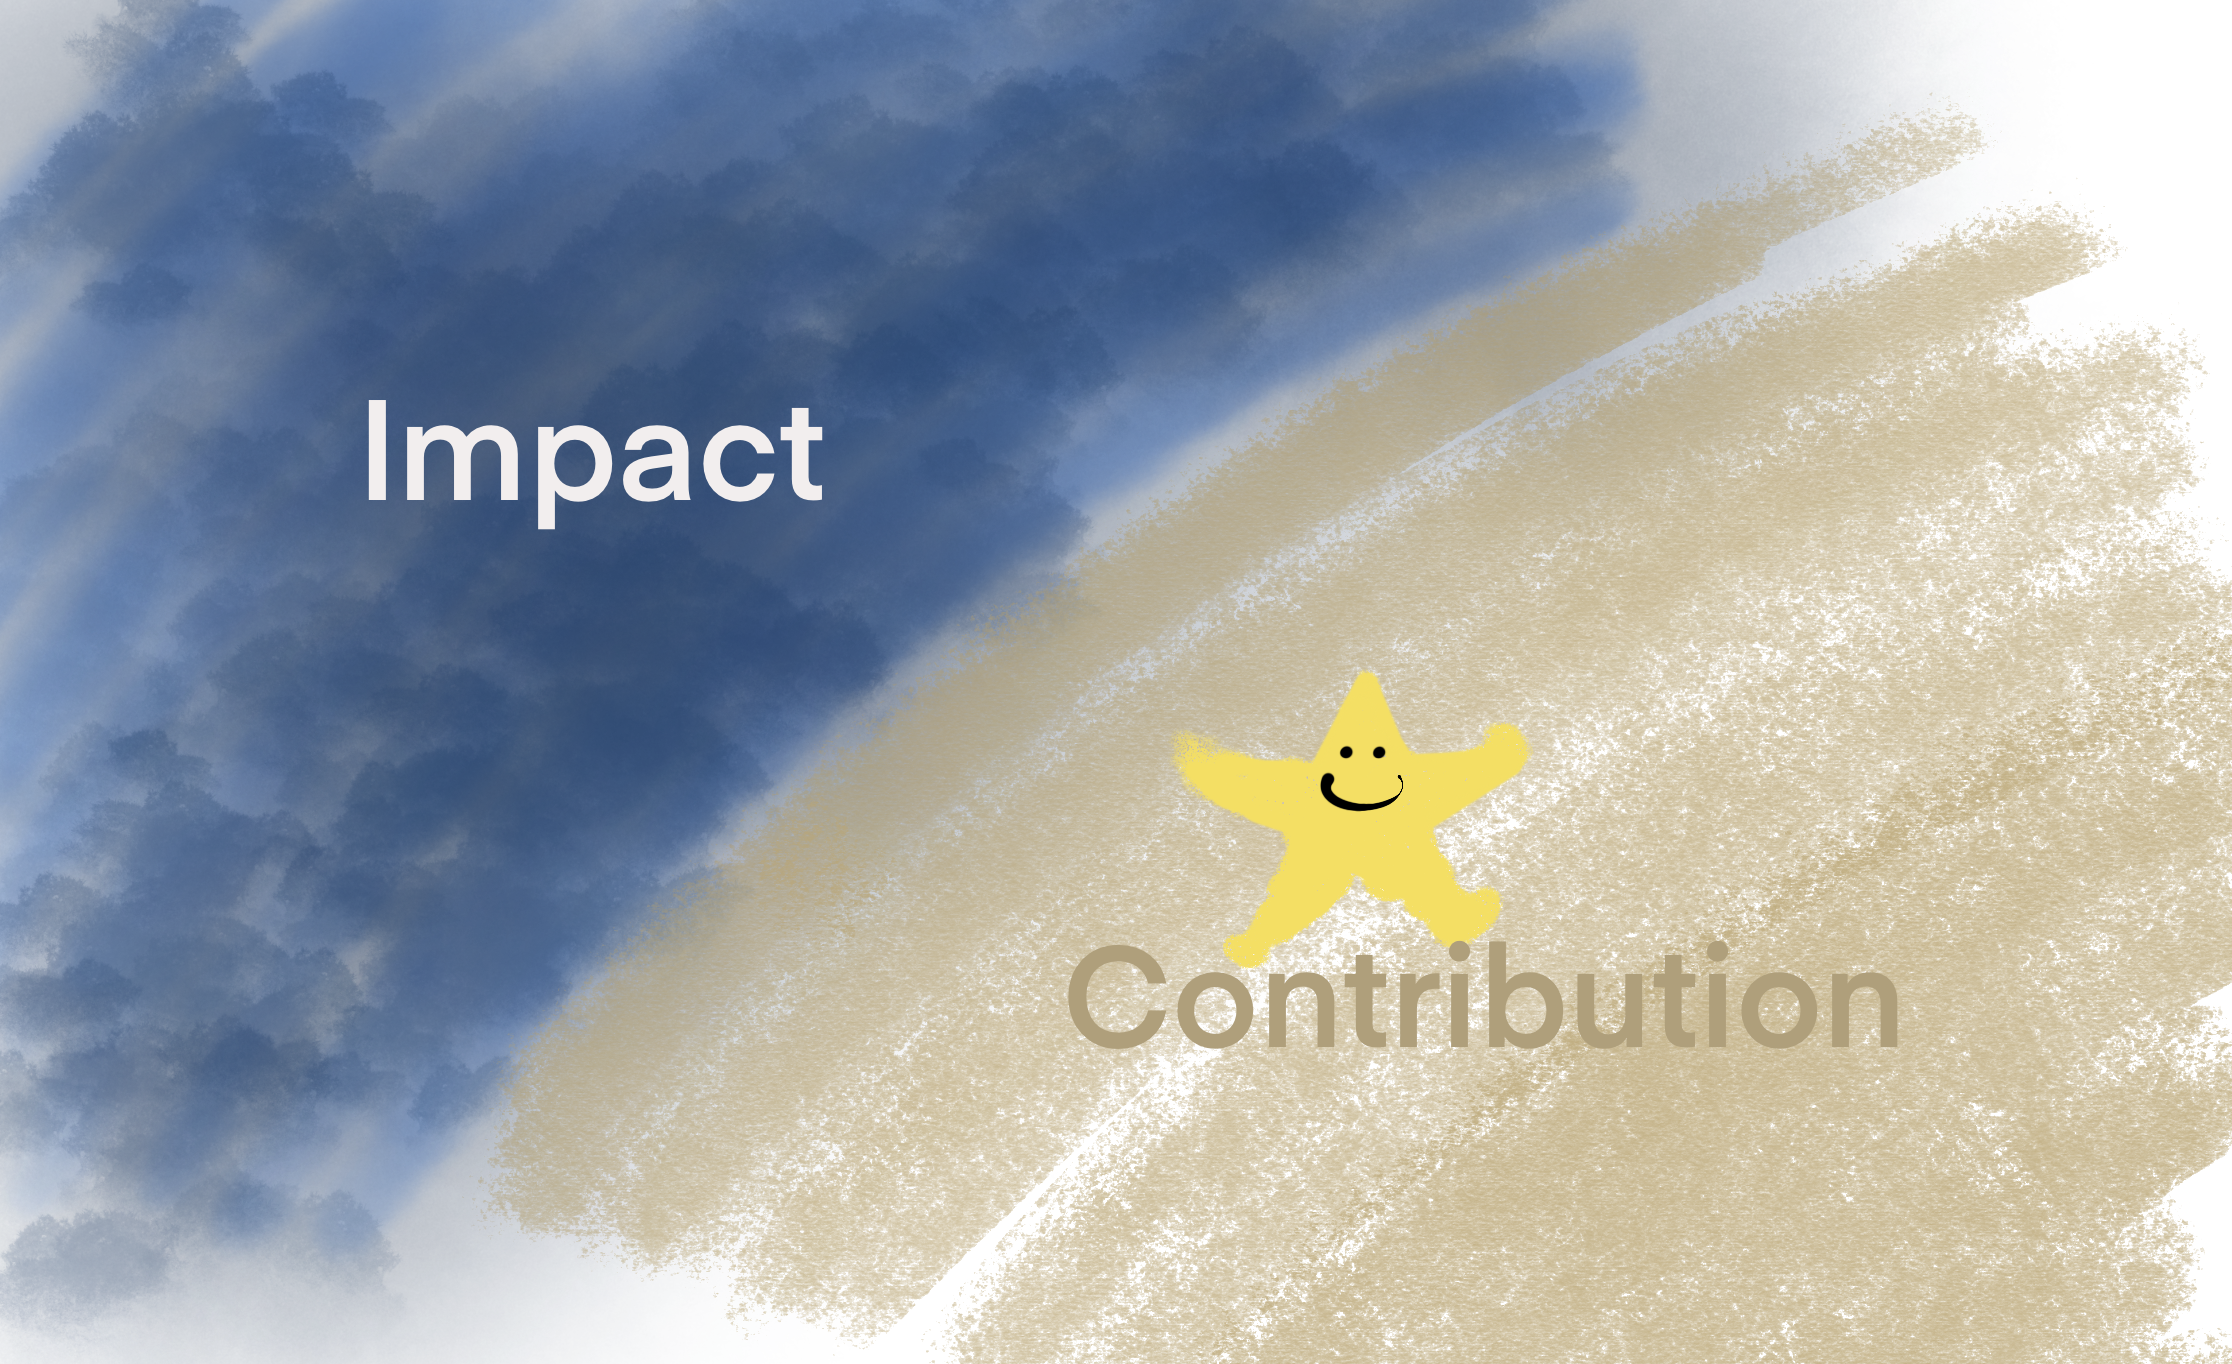 impact is not the same as contribution